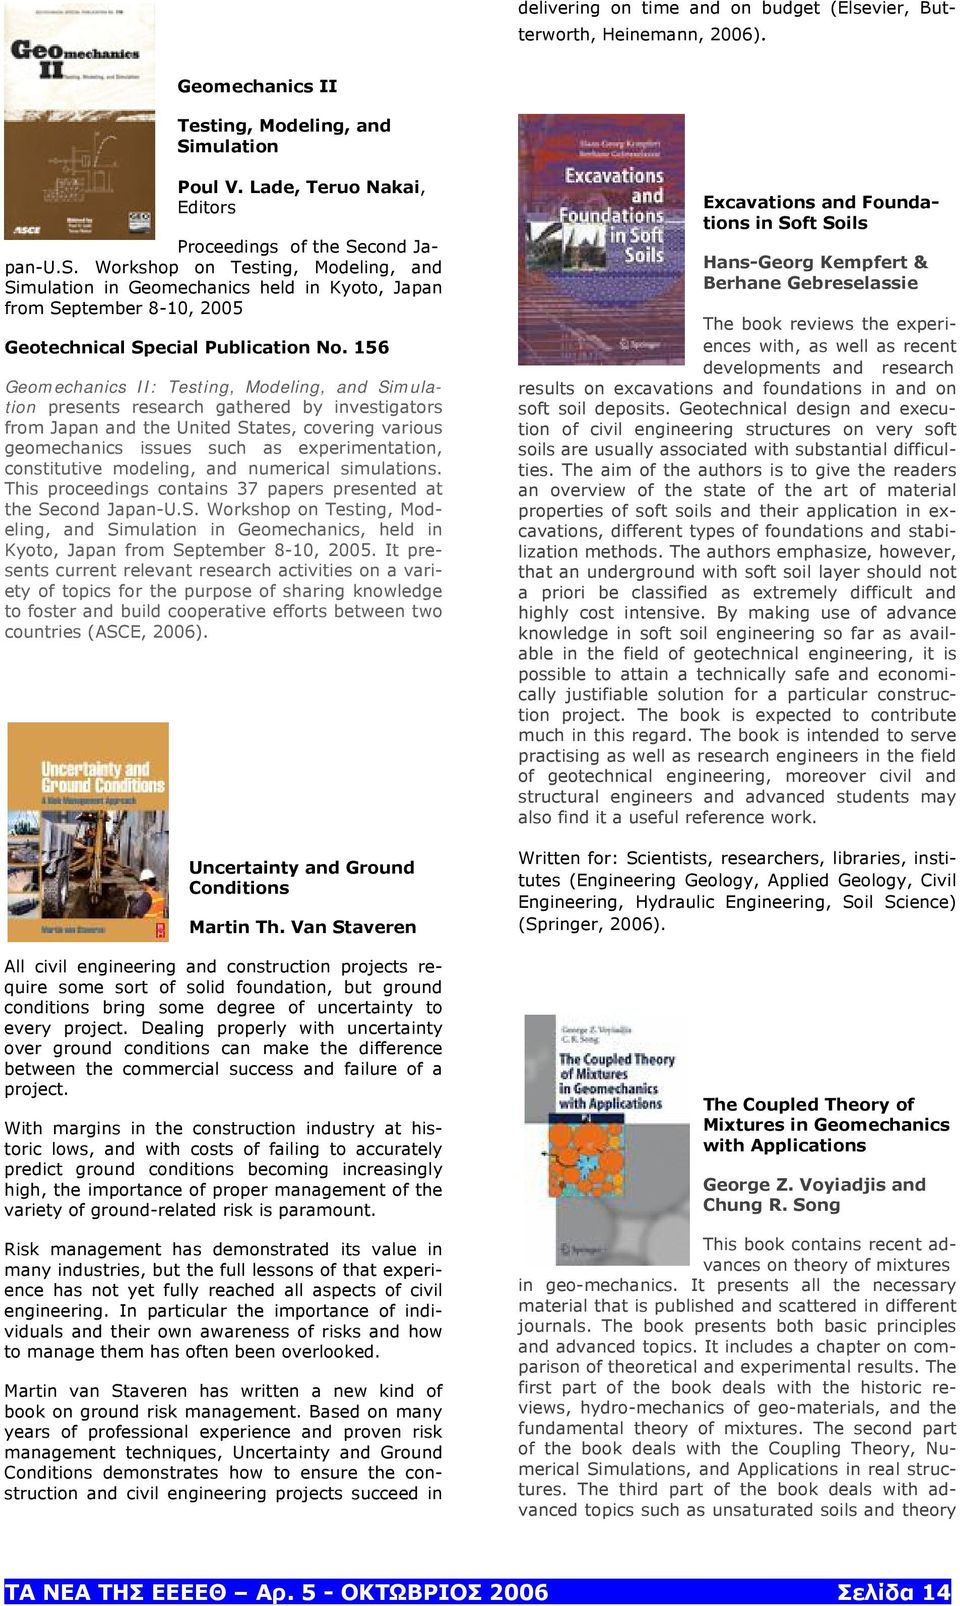 cond Japan-U.S. Workshop on Testing, Modeling, and Simulation in Geomechanics held in Kyoto, Japan from September 8-10, 2005 Geotechnical Special Publication No.